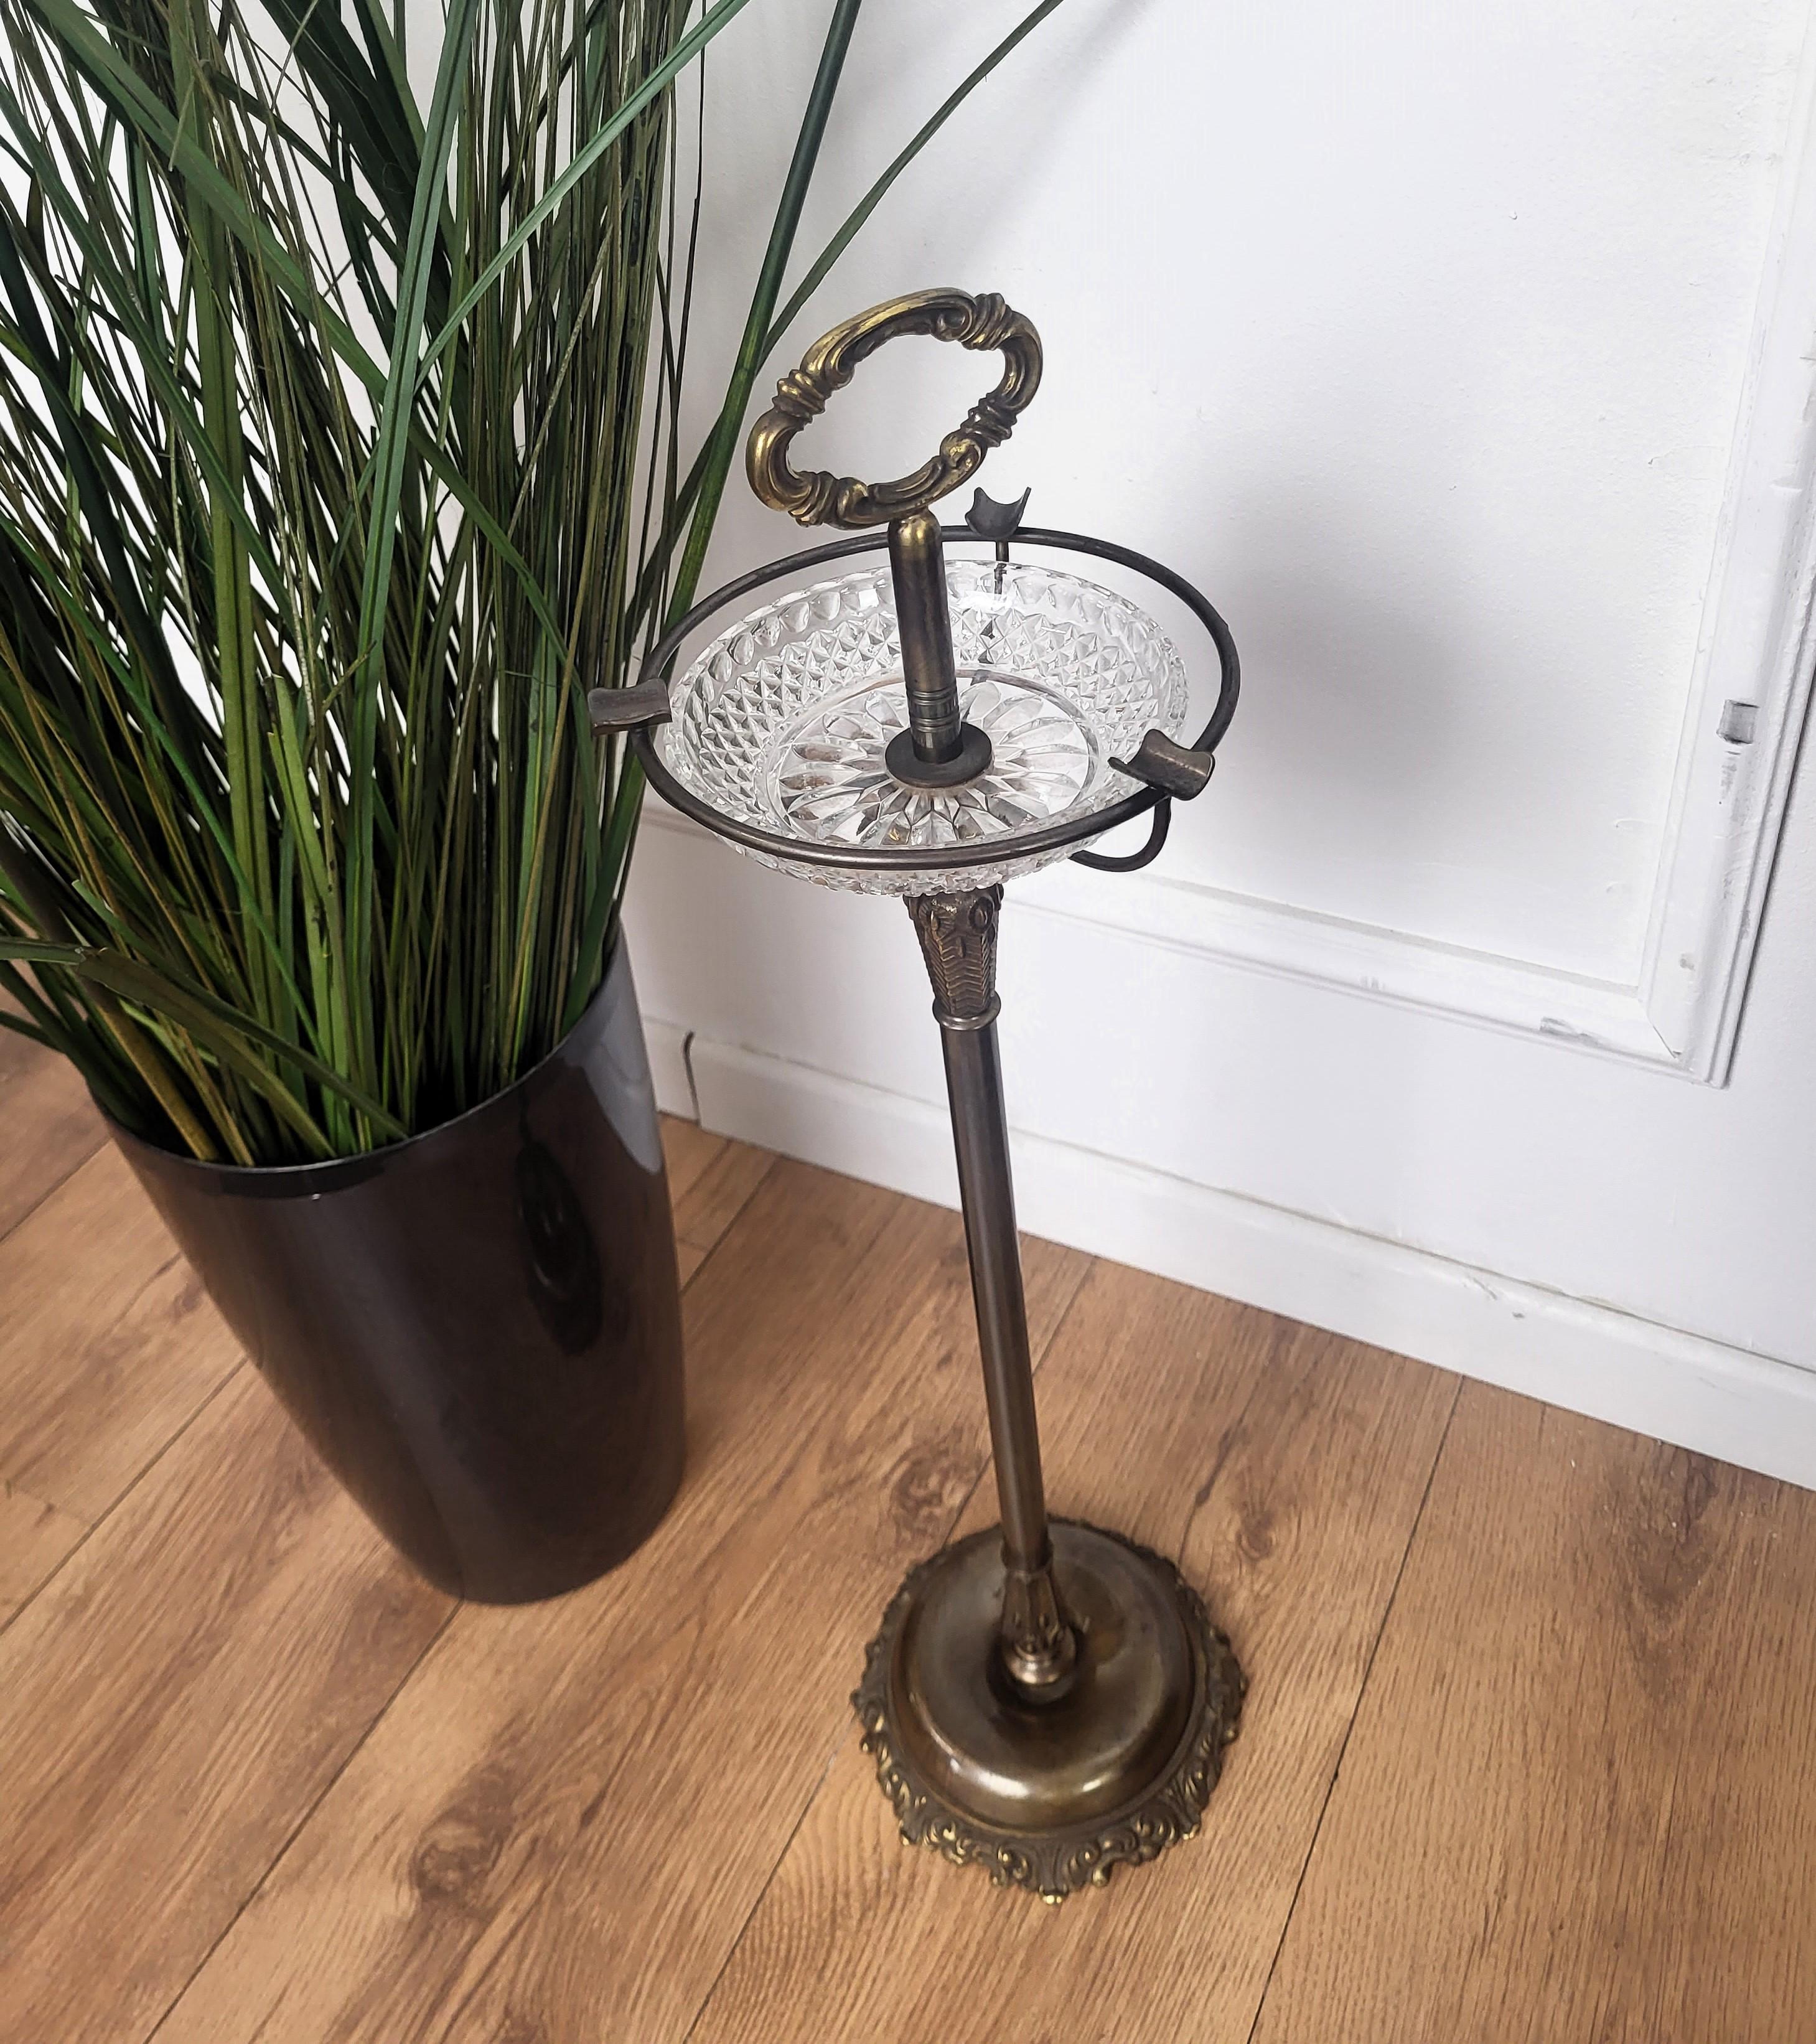 Beautiful brass and glass ashtray stand, manufactured in the 1980s in Italy. The conditions are excellent, with very minor fading and great timeless patina of the gilt brass.

A great piece that perfectly adds to every home decor the typical glitz,